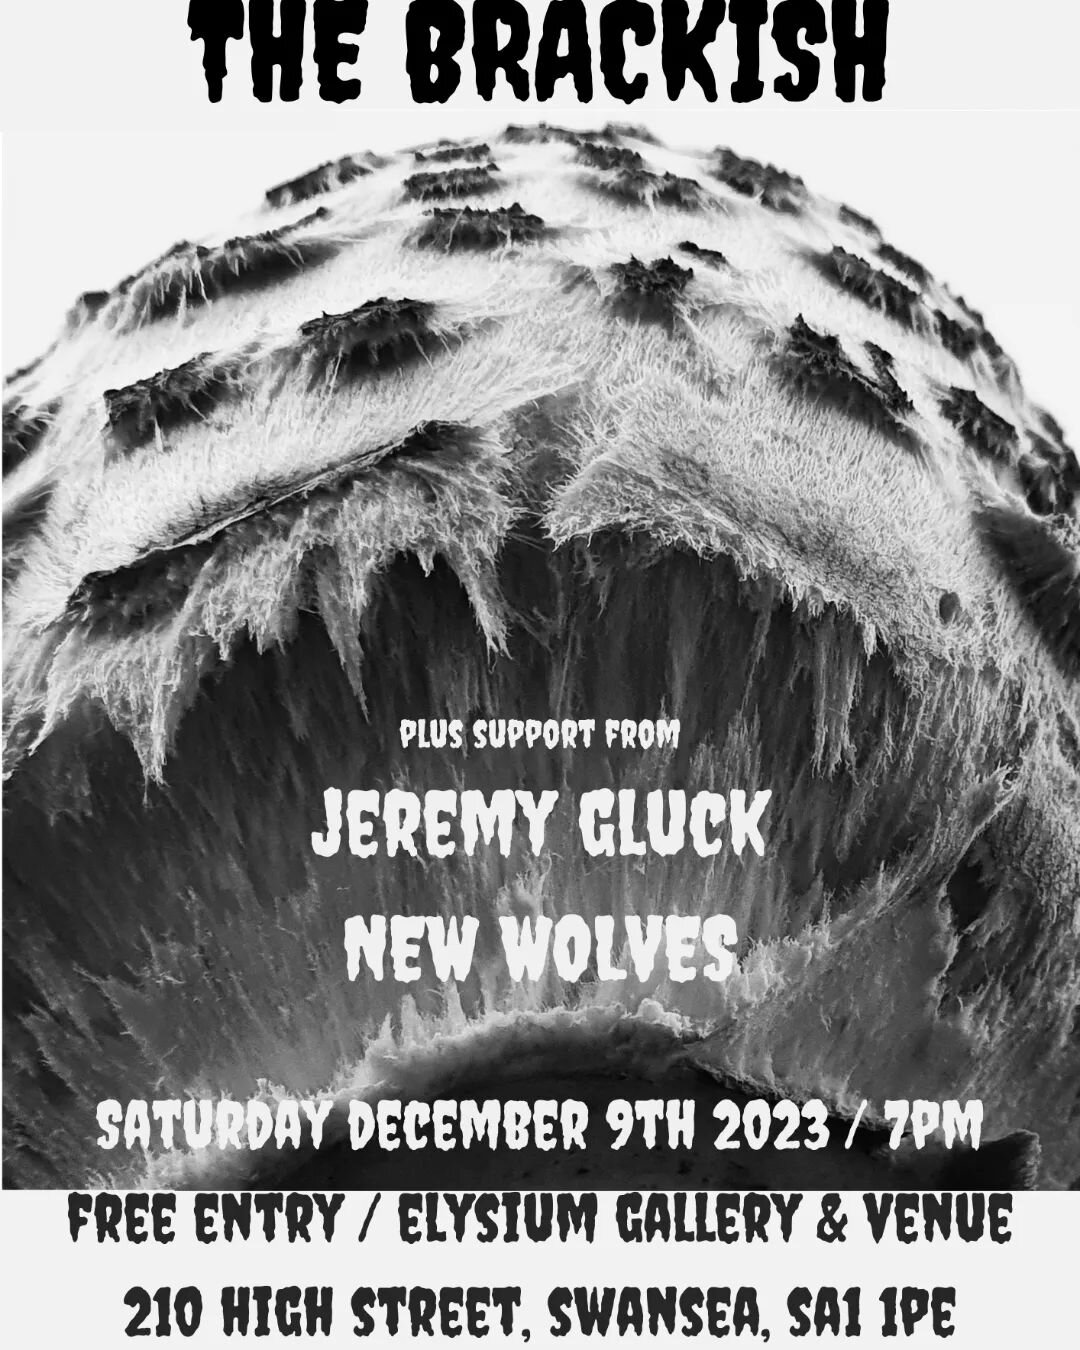 Looking forward to our first gig in Swansea with Jeremy Gluck and @new.wolves !